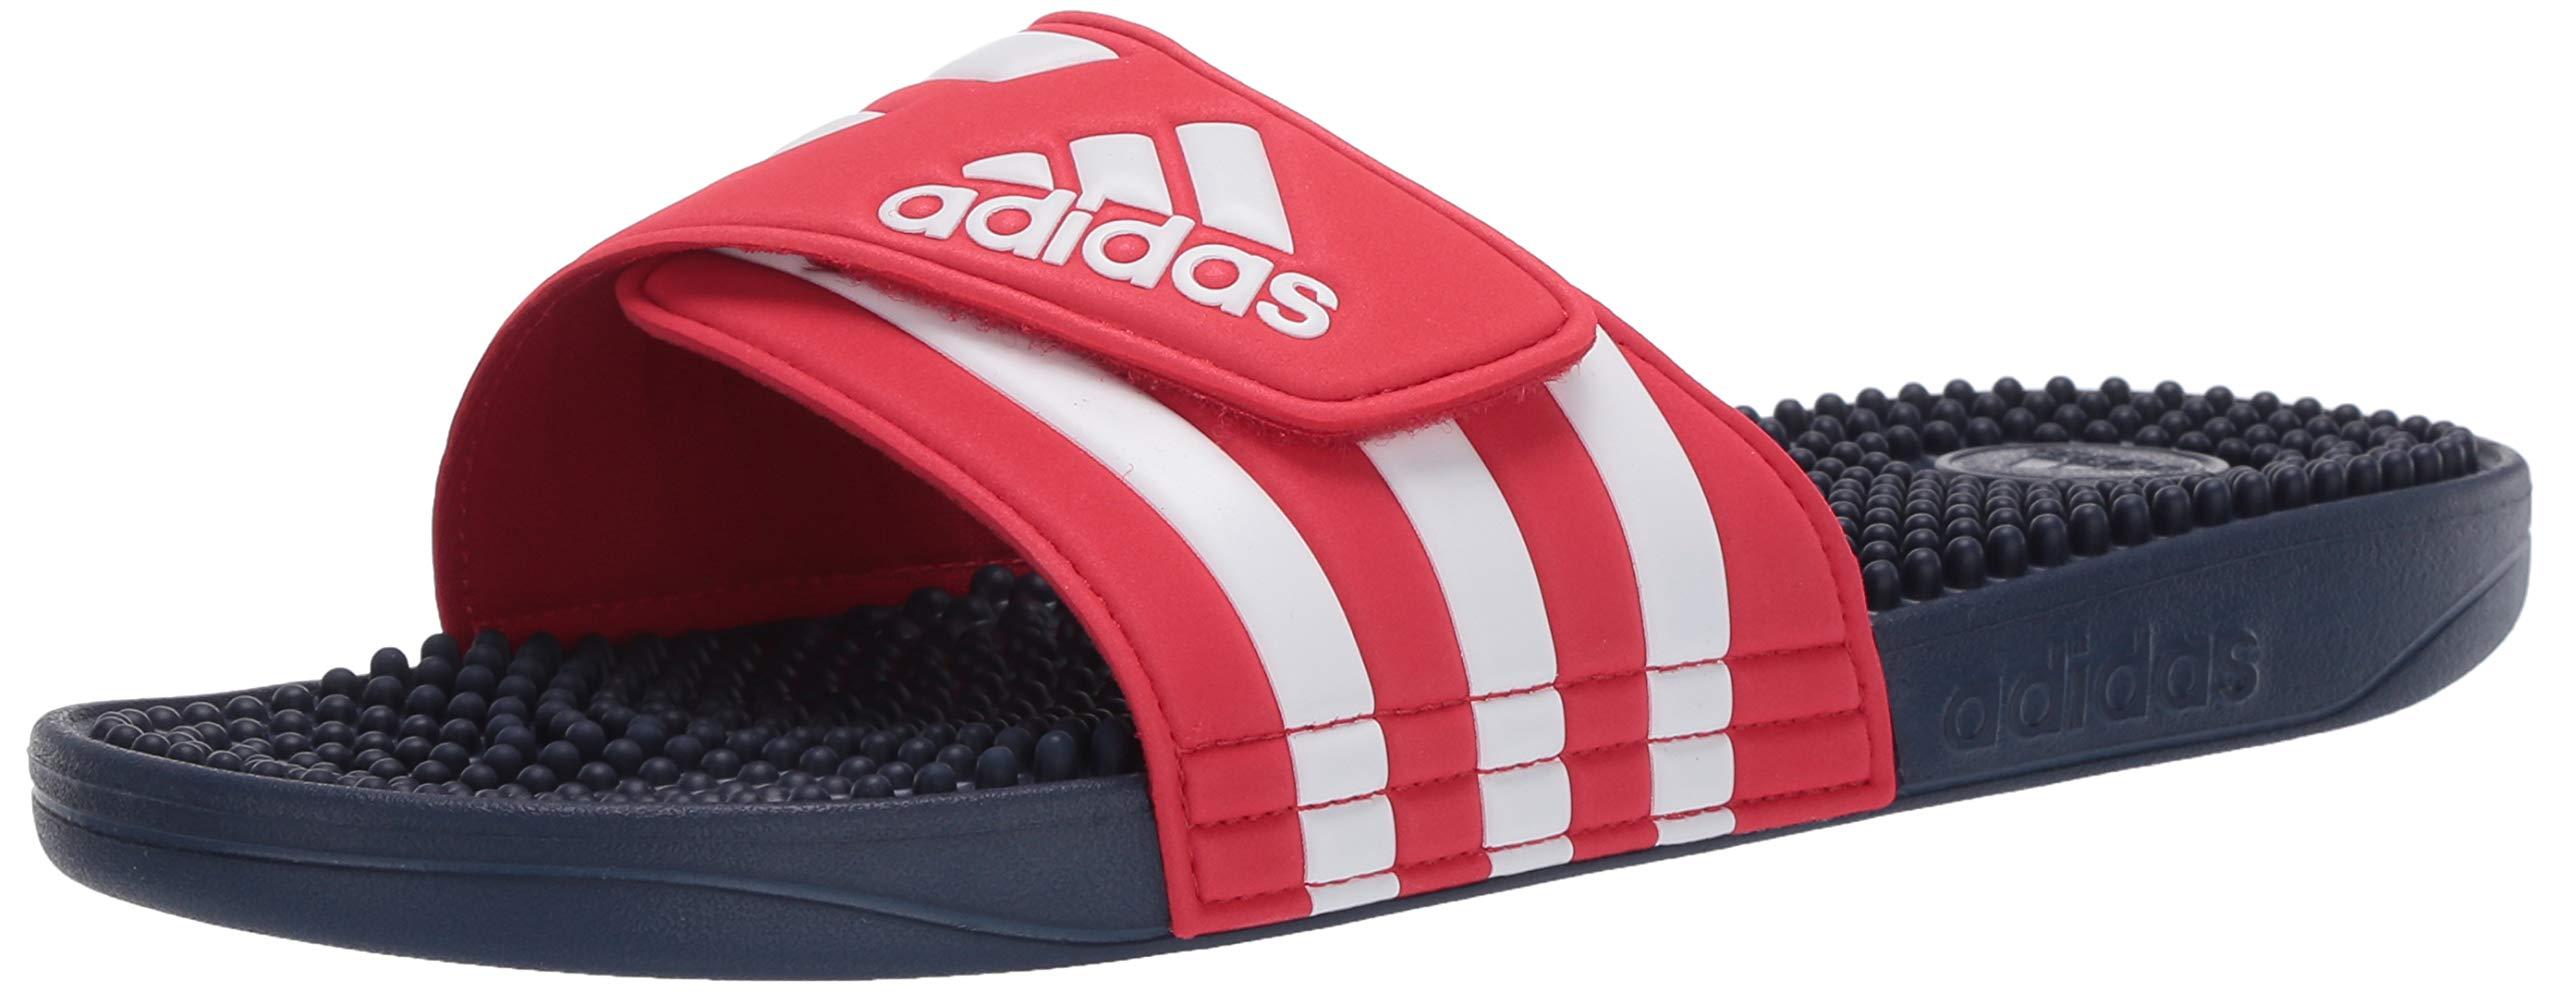 adidas 's Adissage Slide Sandal in Red - Lyst